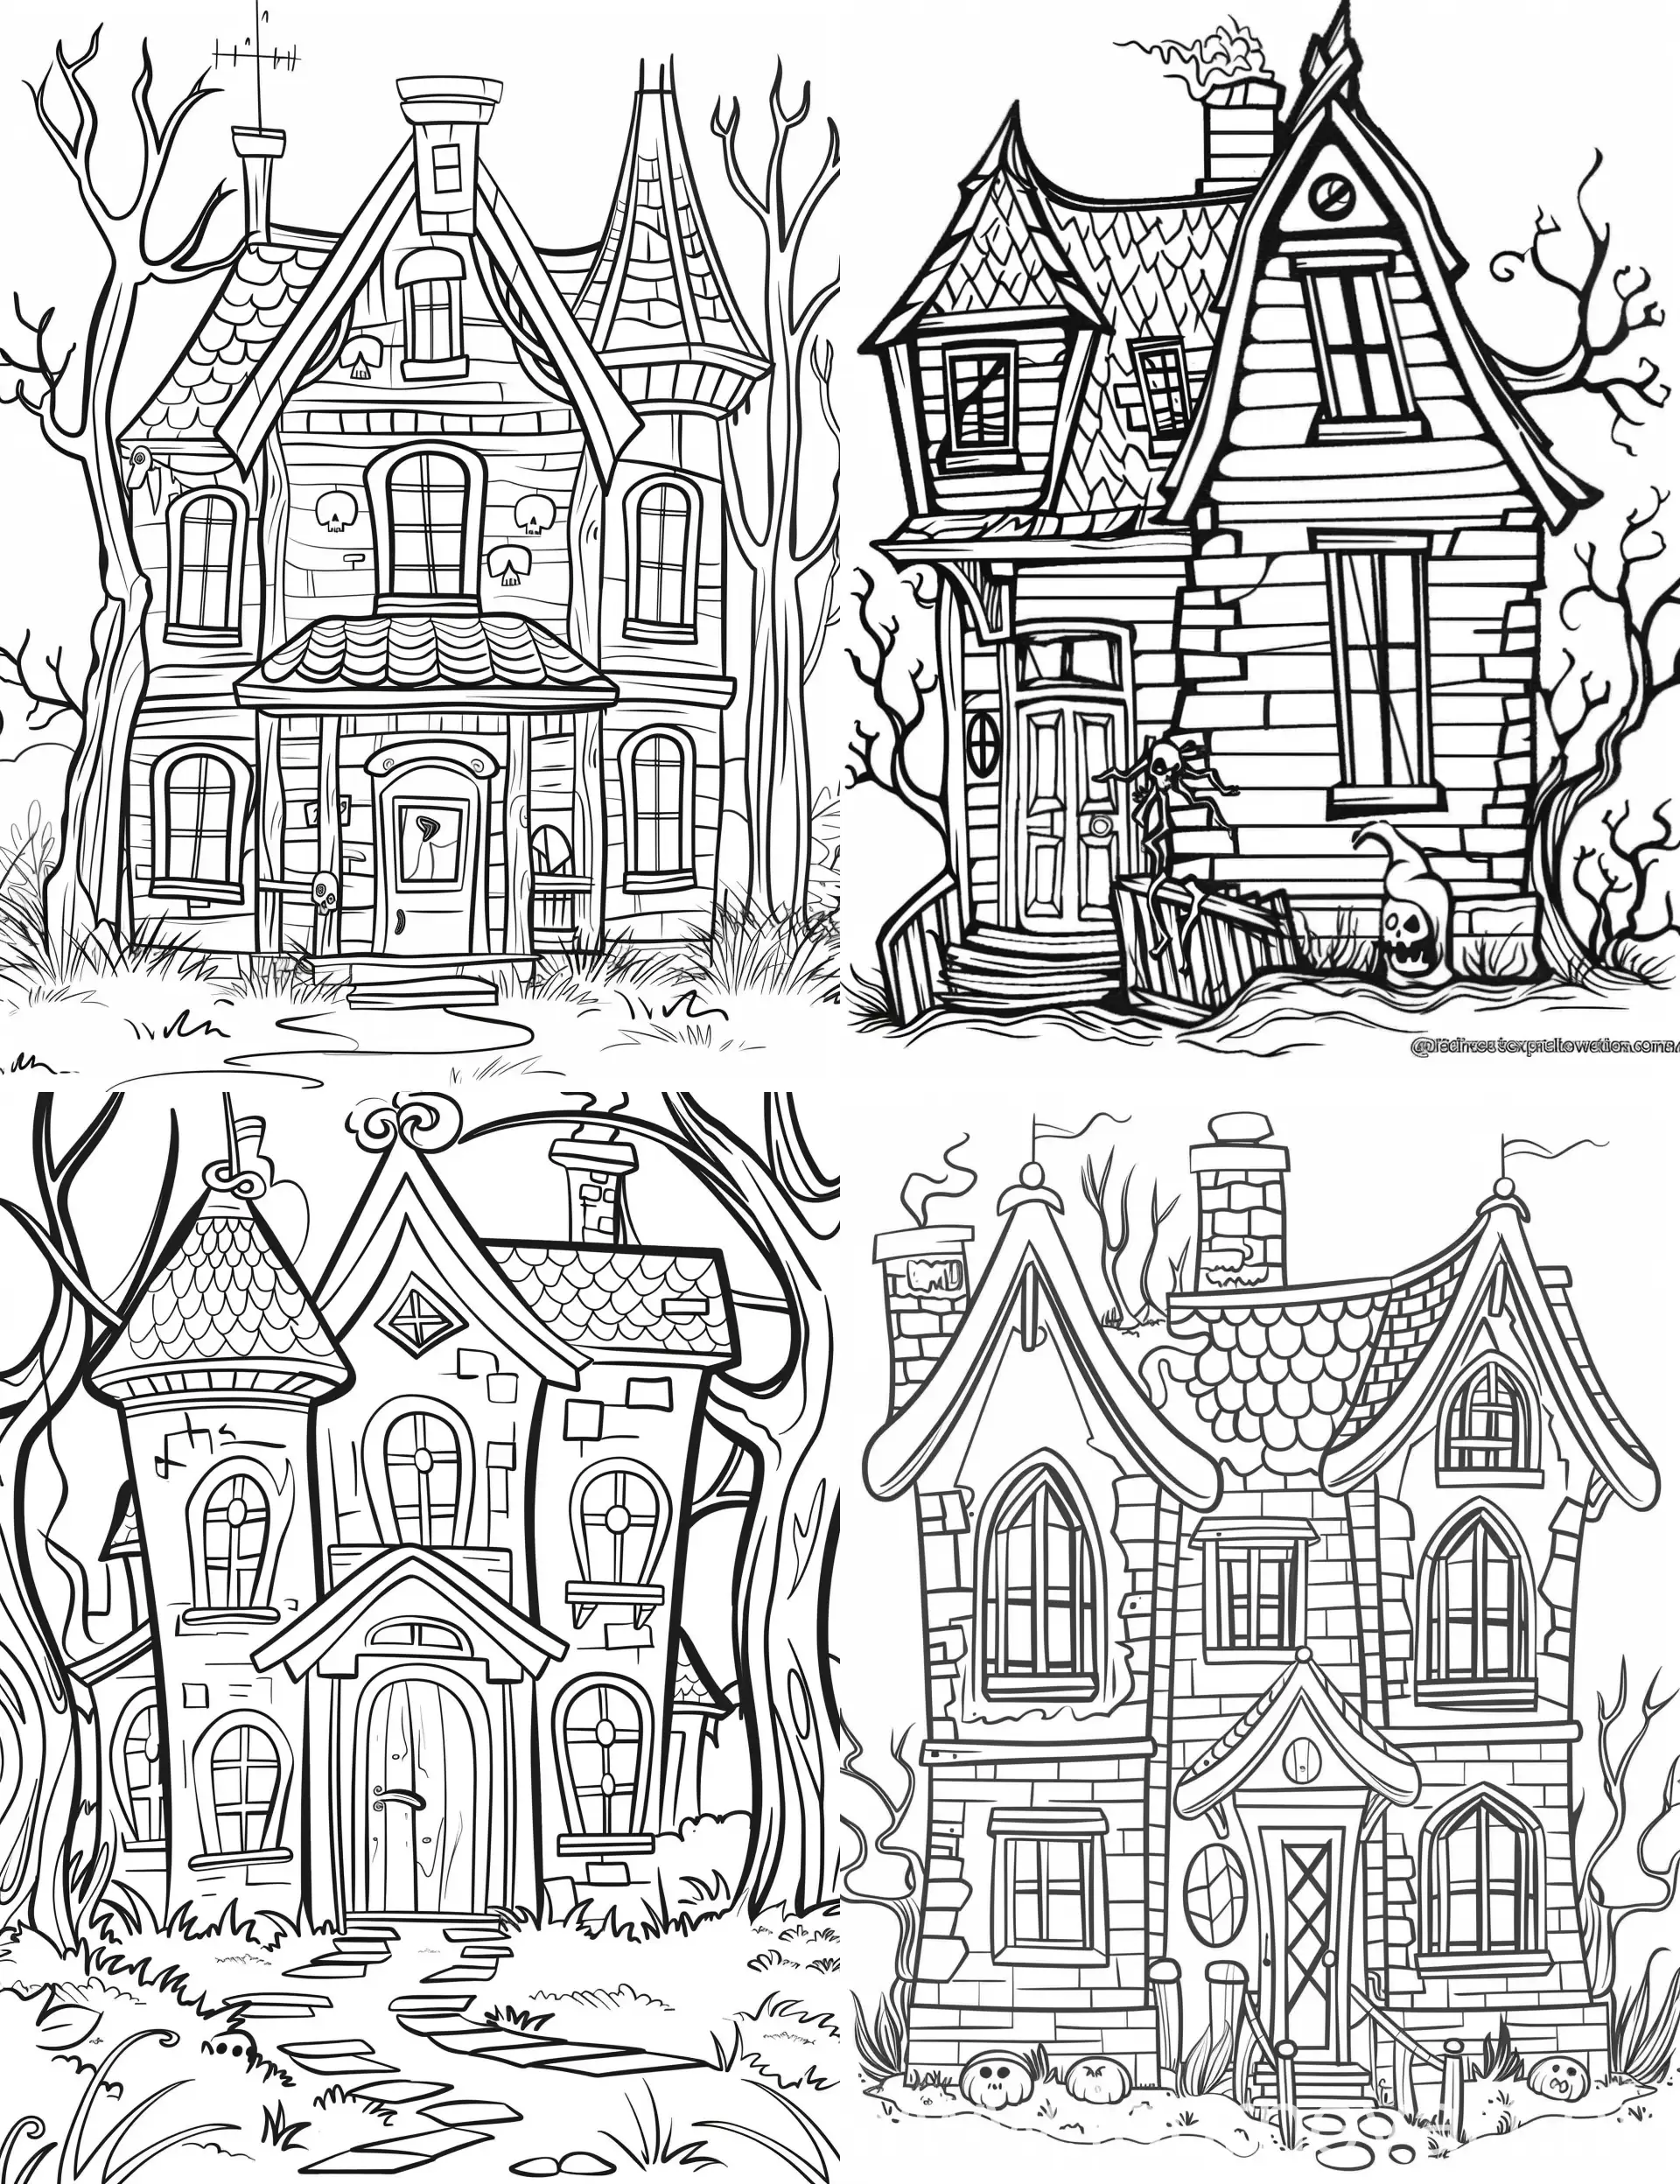 Cartoon-Haunted-House-Coloring-Page-for-Kids